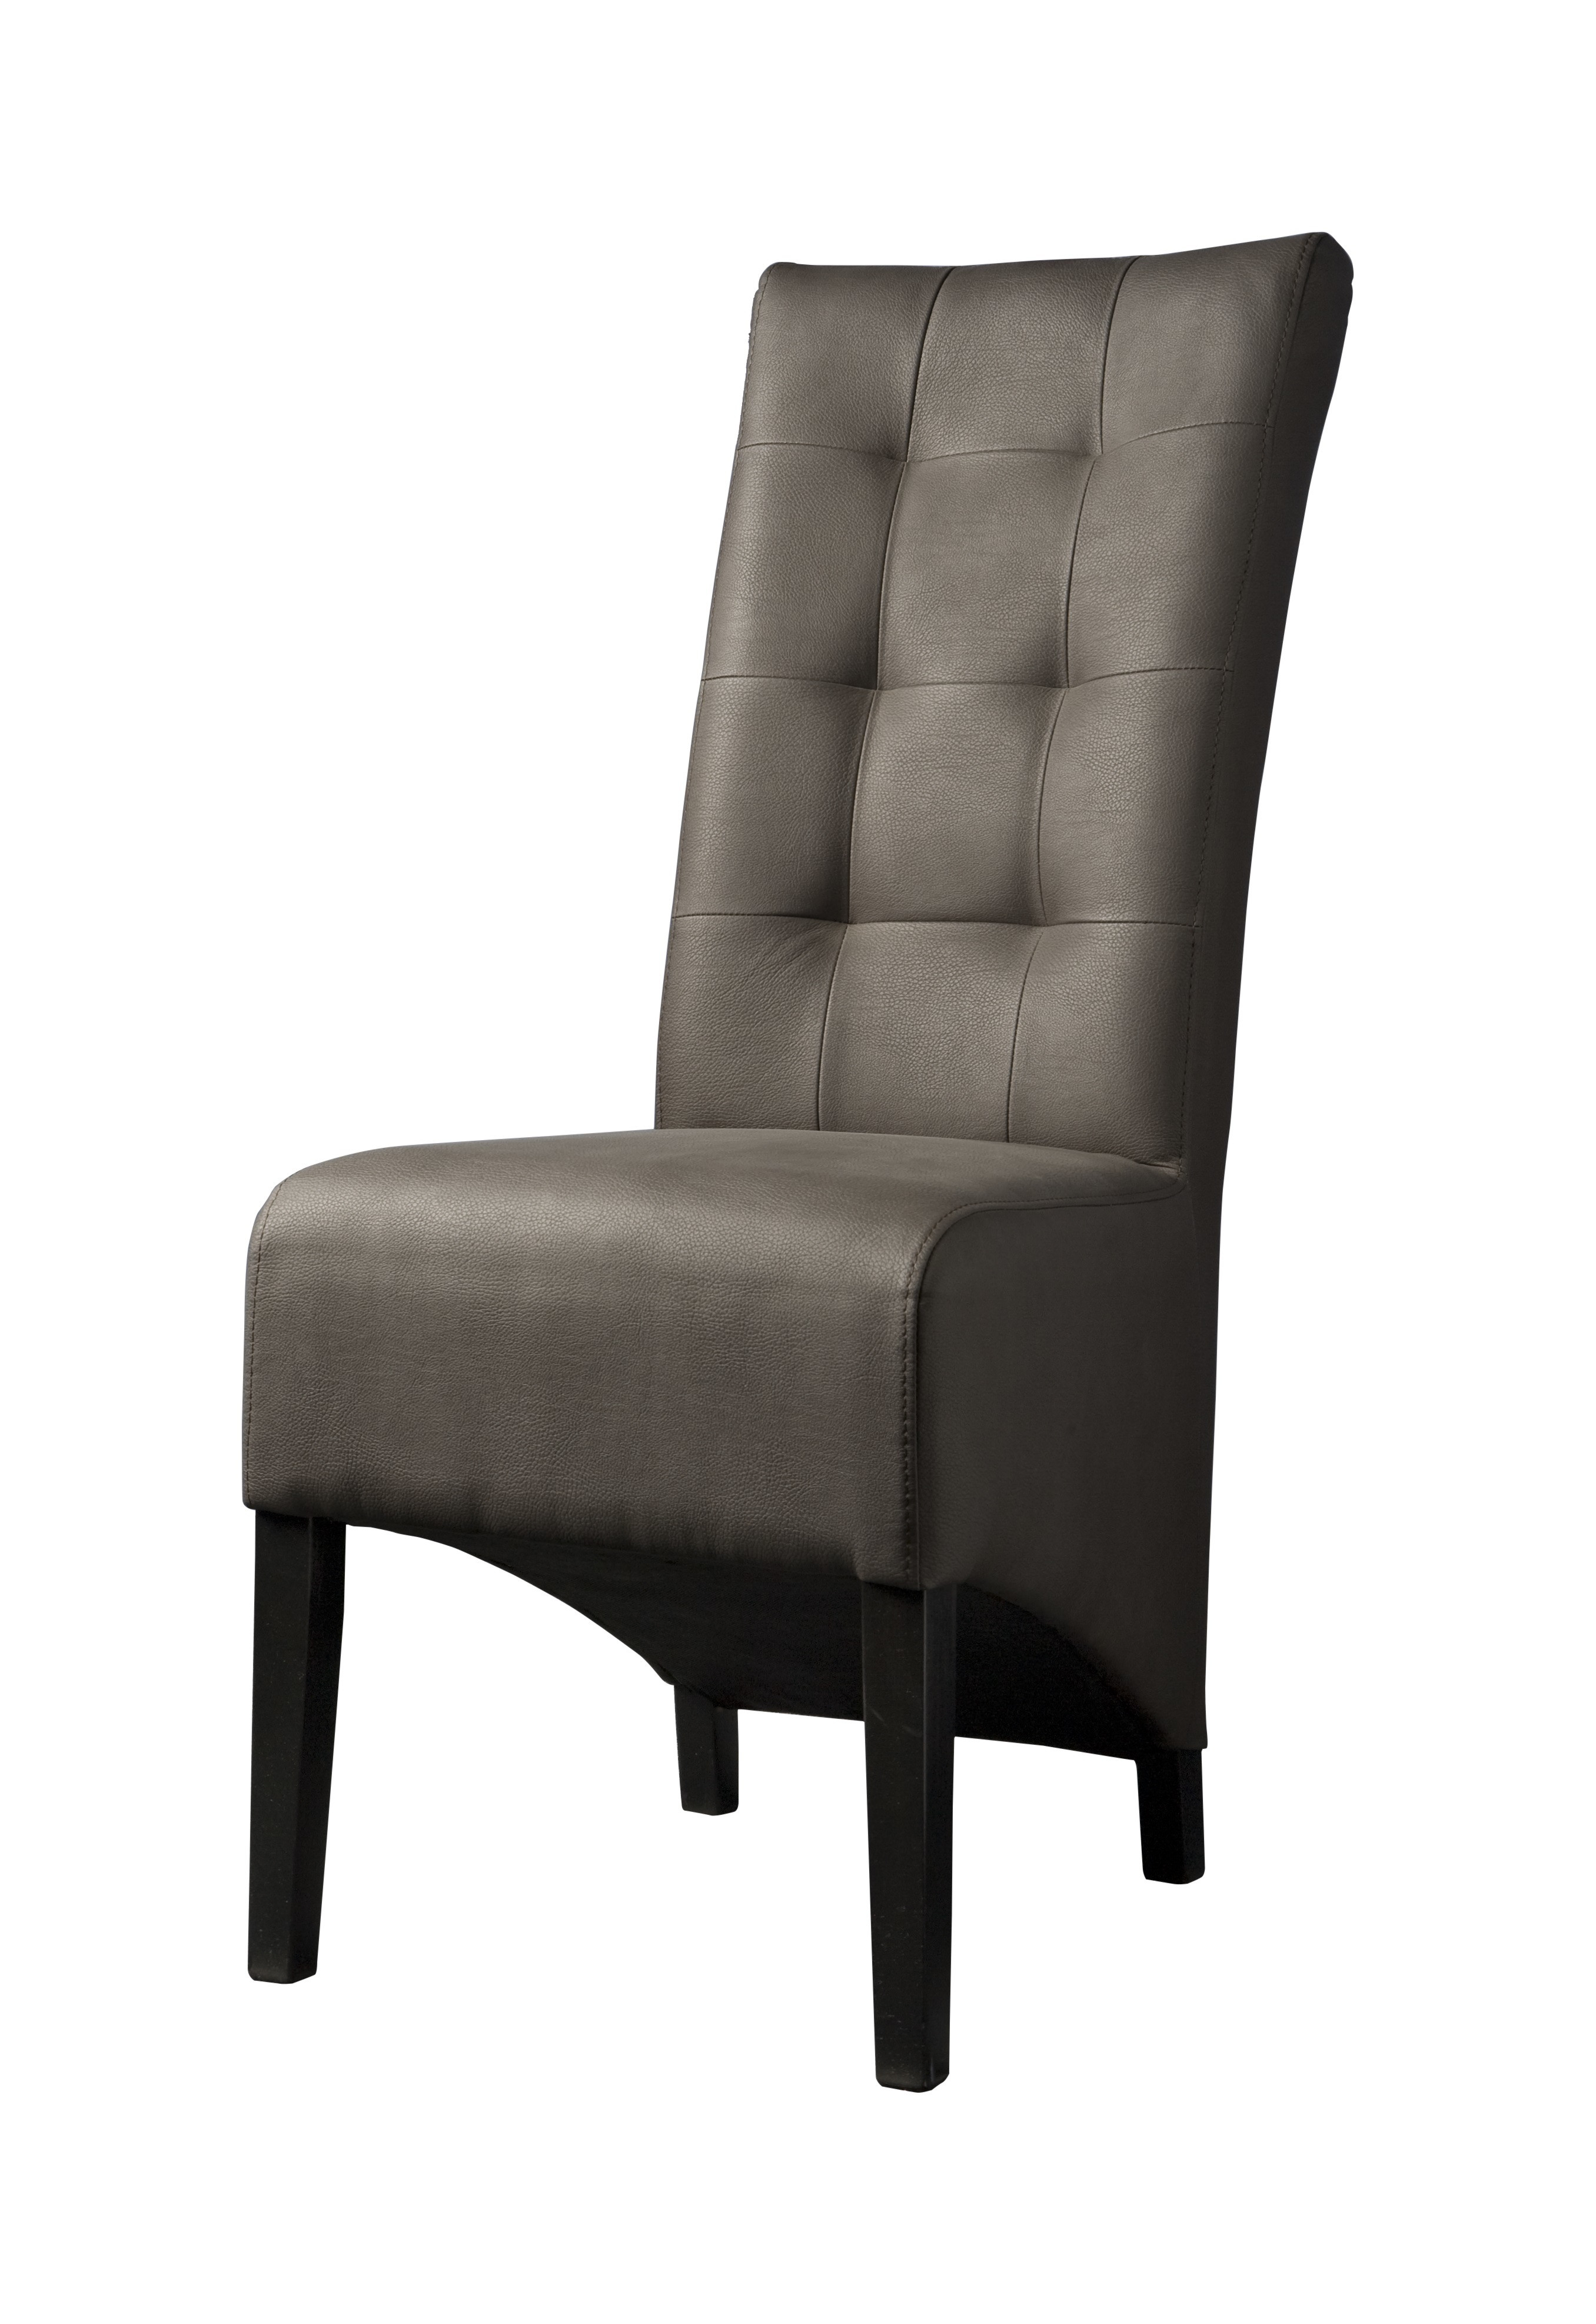 Rent a Dining chair Rustic anthracite? Rent at KeyPro furniture rental!